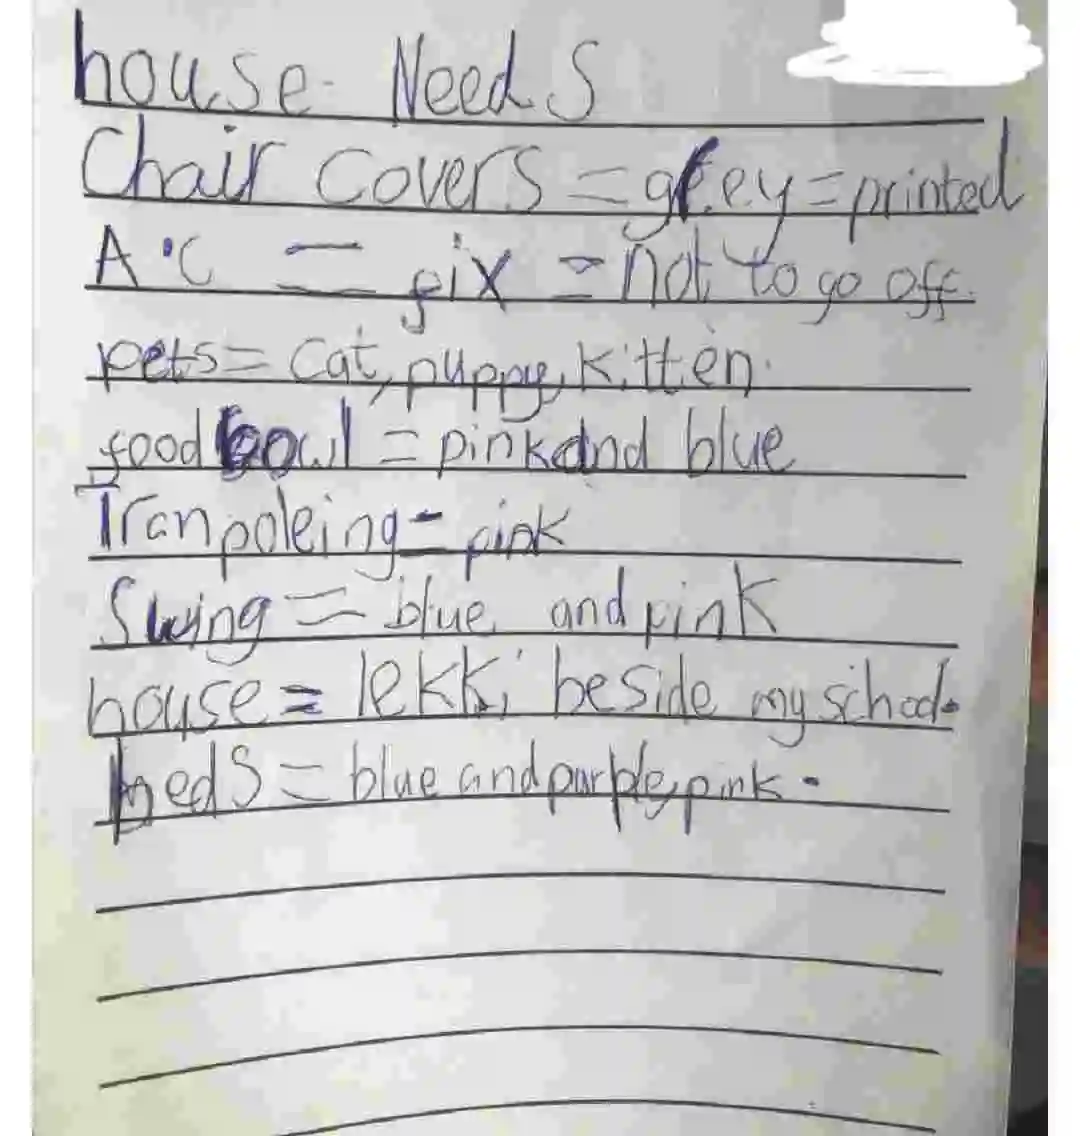 Nigerian father shares his daughter's list of demands and it goes viral